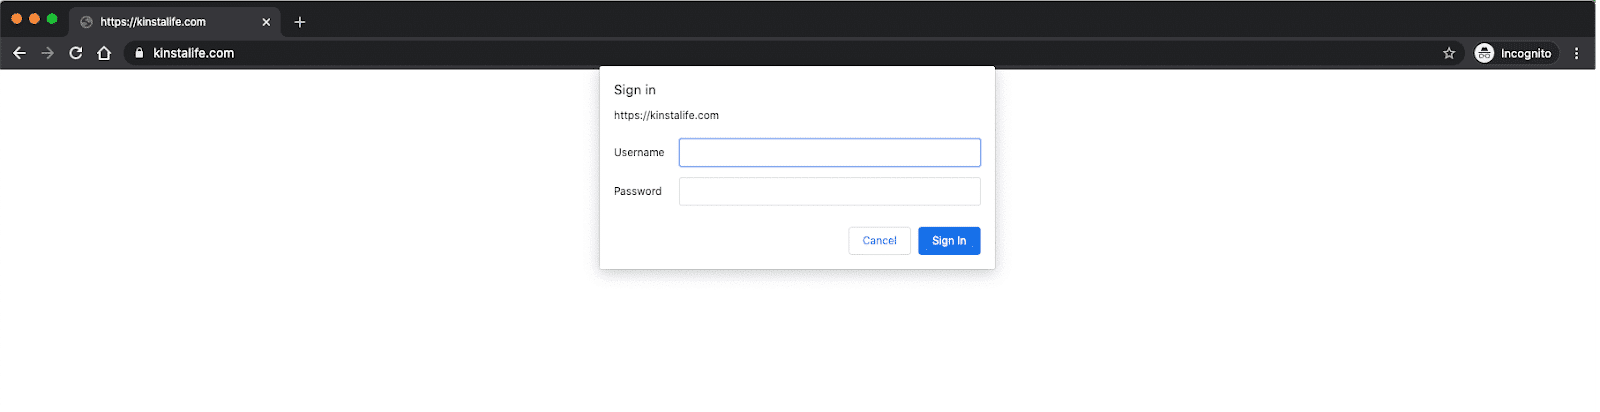 Password protection requires signing in before viewing the site in your browser.